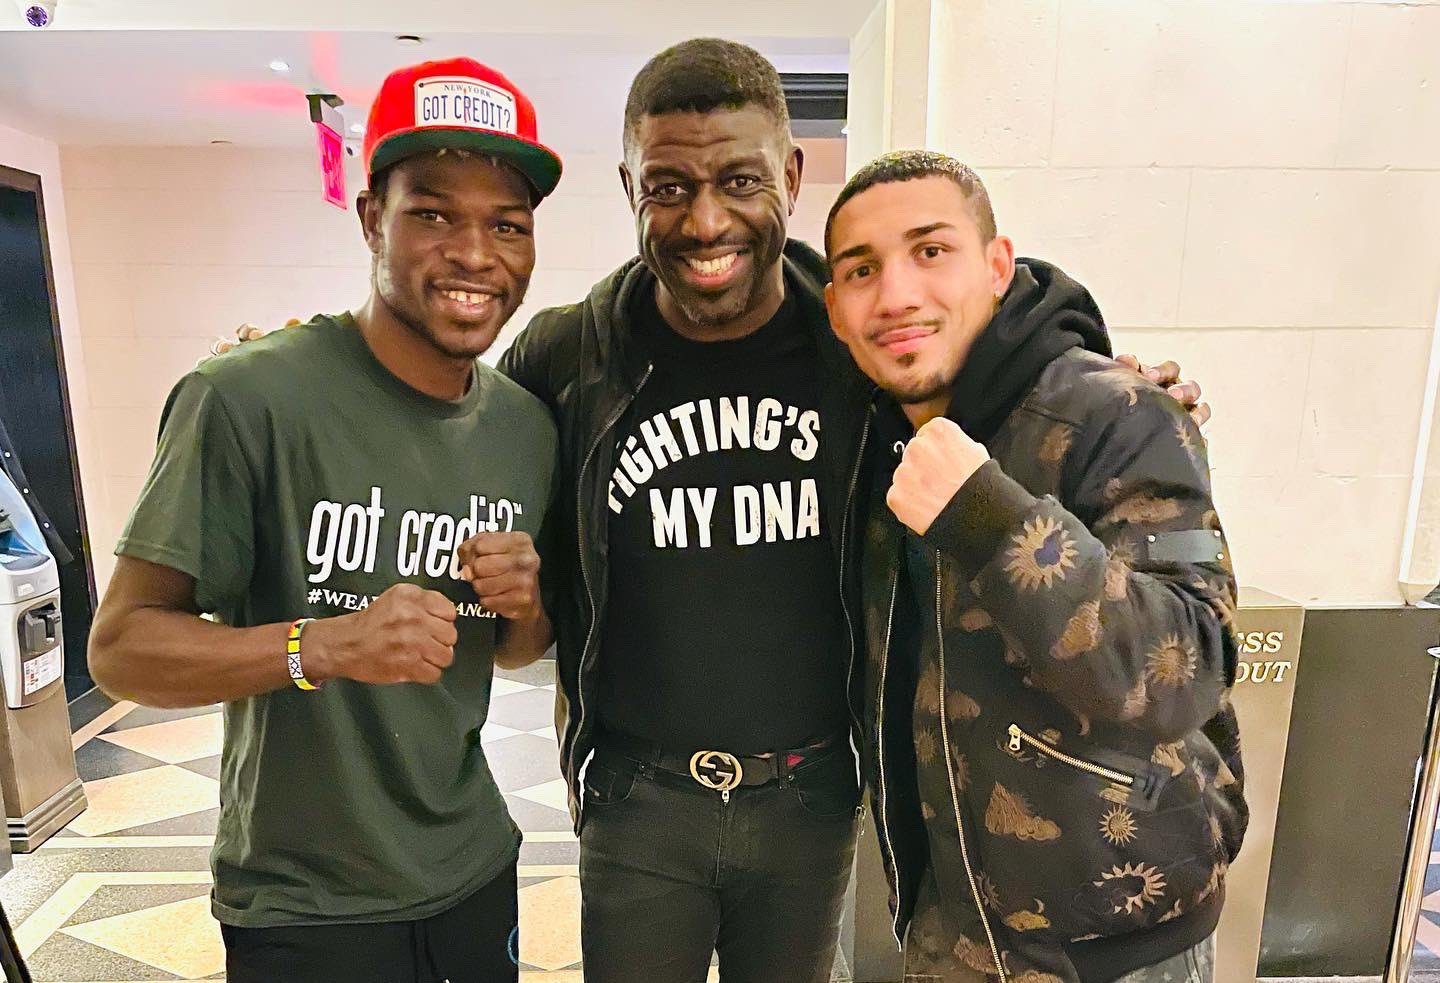 Michael Amoo Bediako [middle] in a pose with Richard Commey and Teofimo Lopez